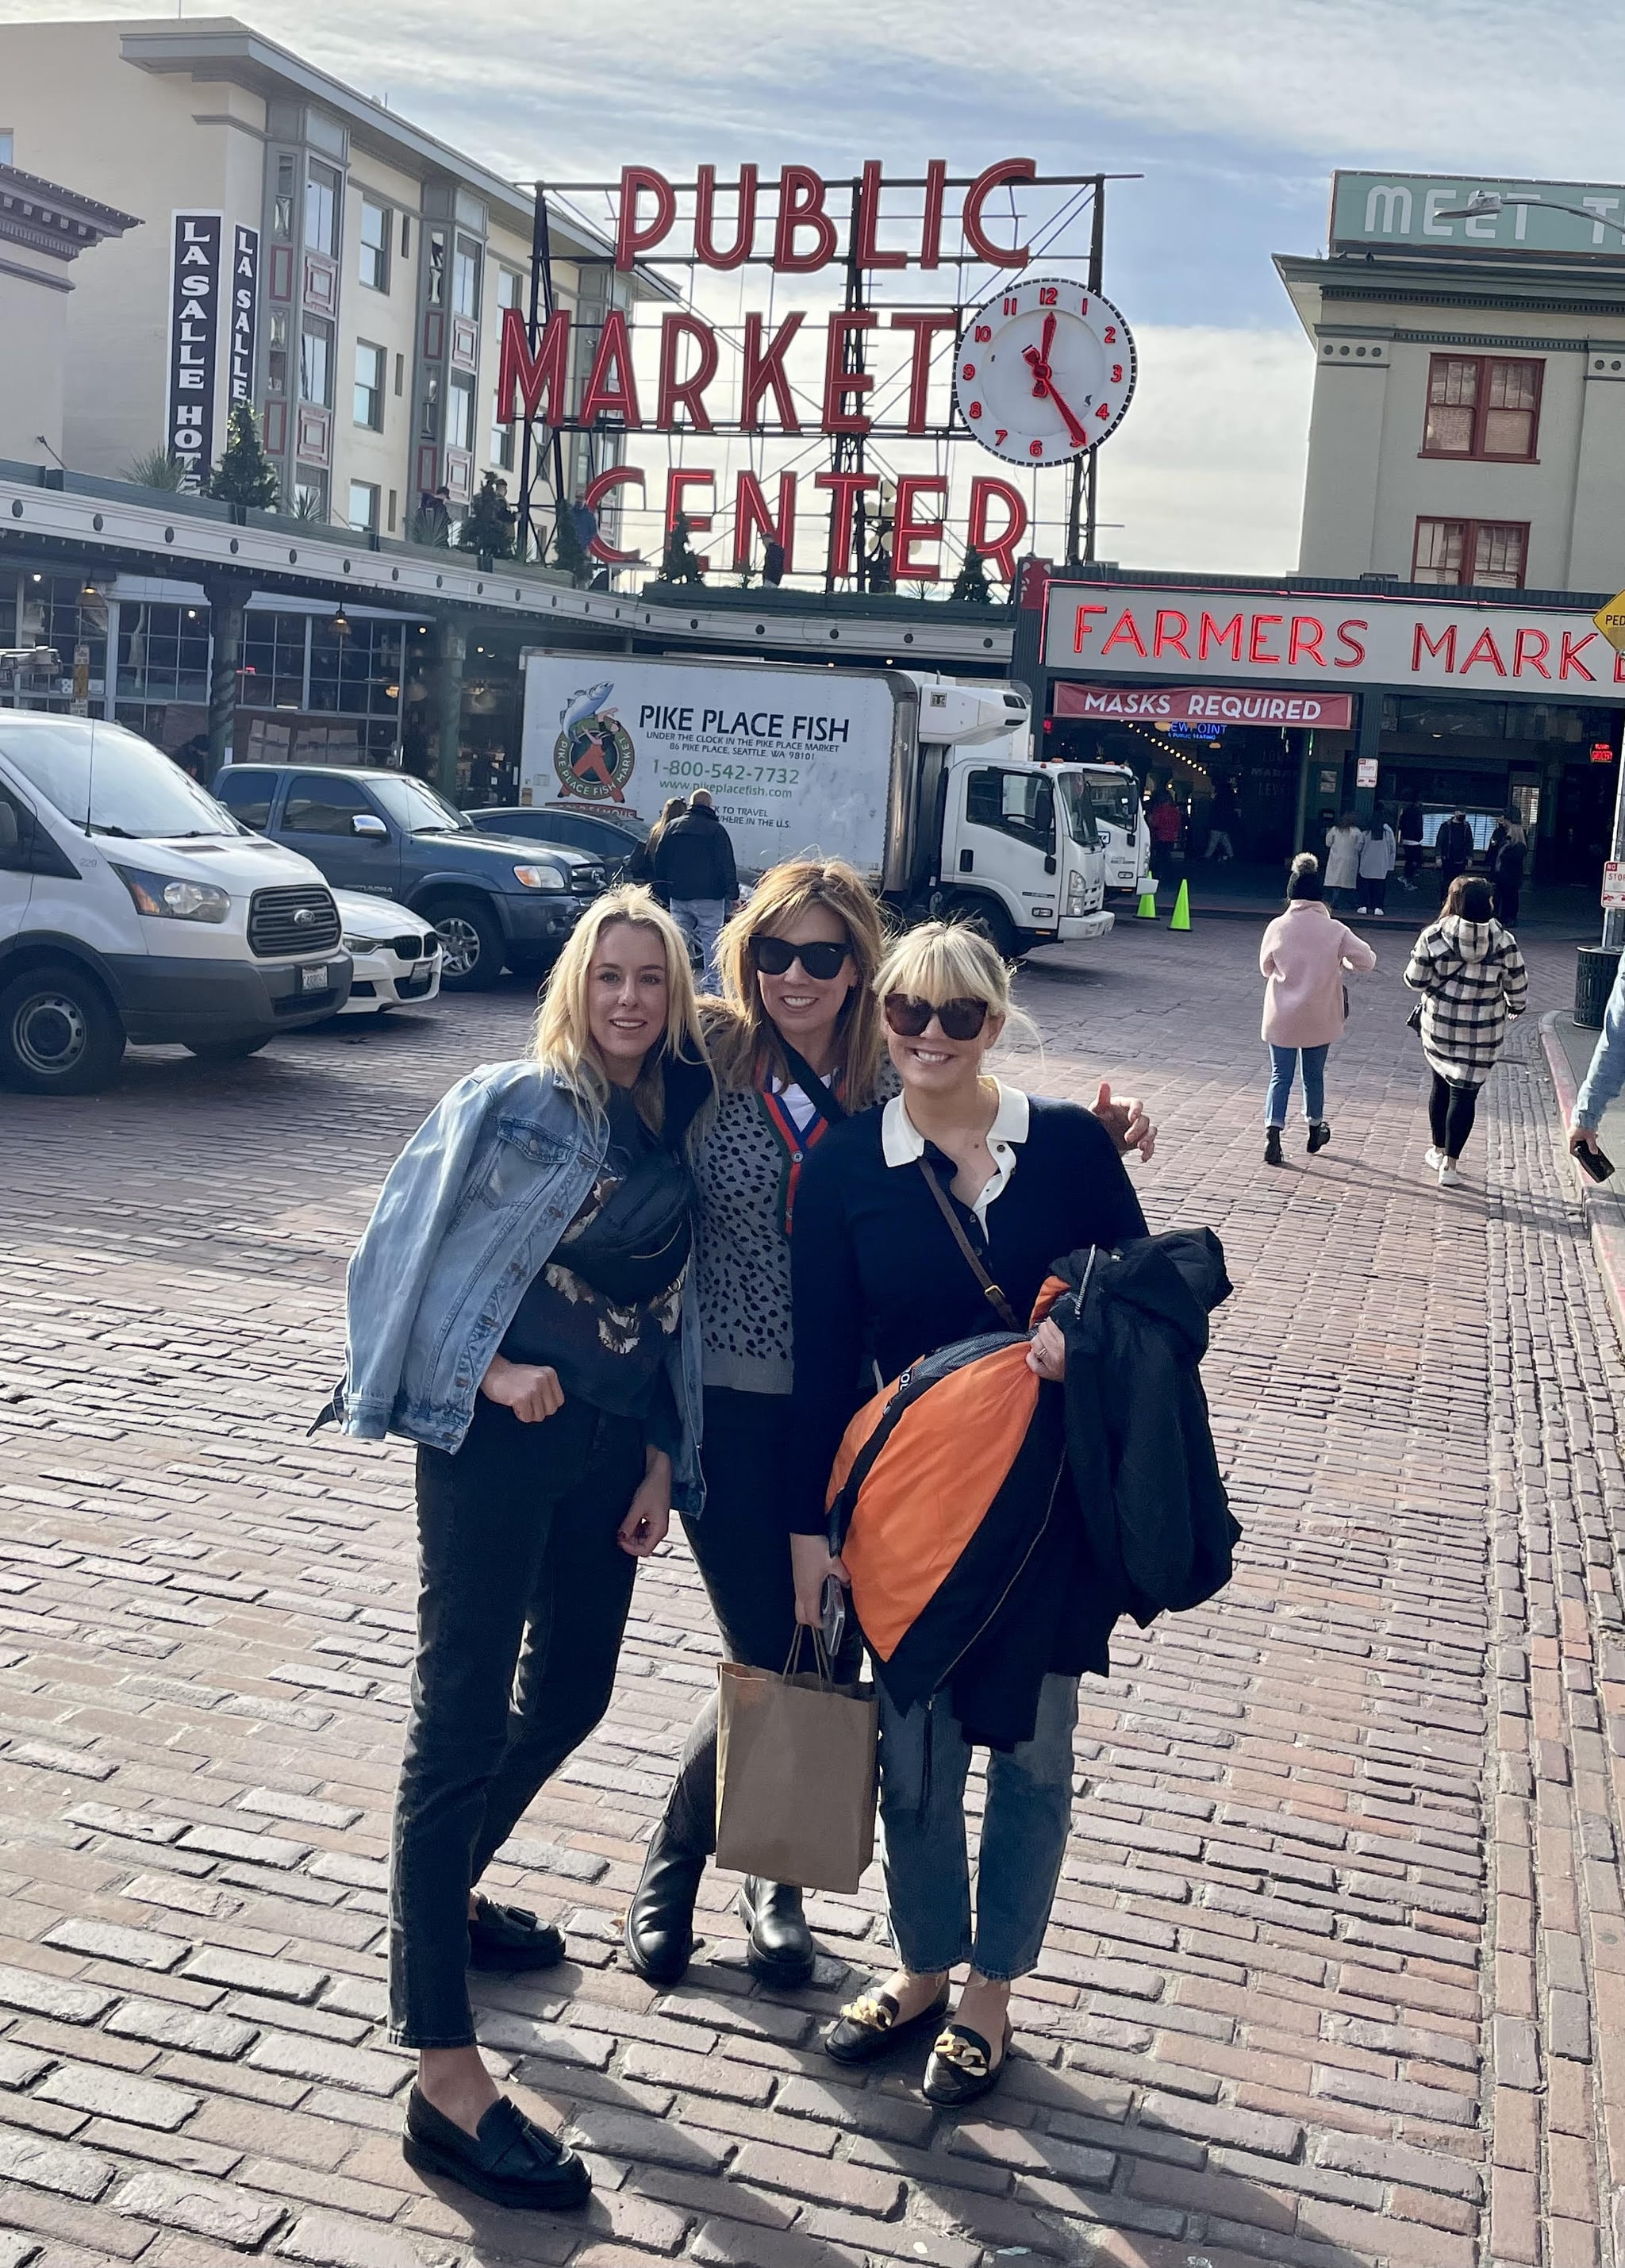 The Buy Guide team in Seattle for meetings at Stanley corporate offices in November 2021. From left to right, Linley Hutchinson, Ashlee LeSueur, and Taylor Cannon.